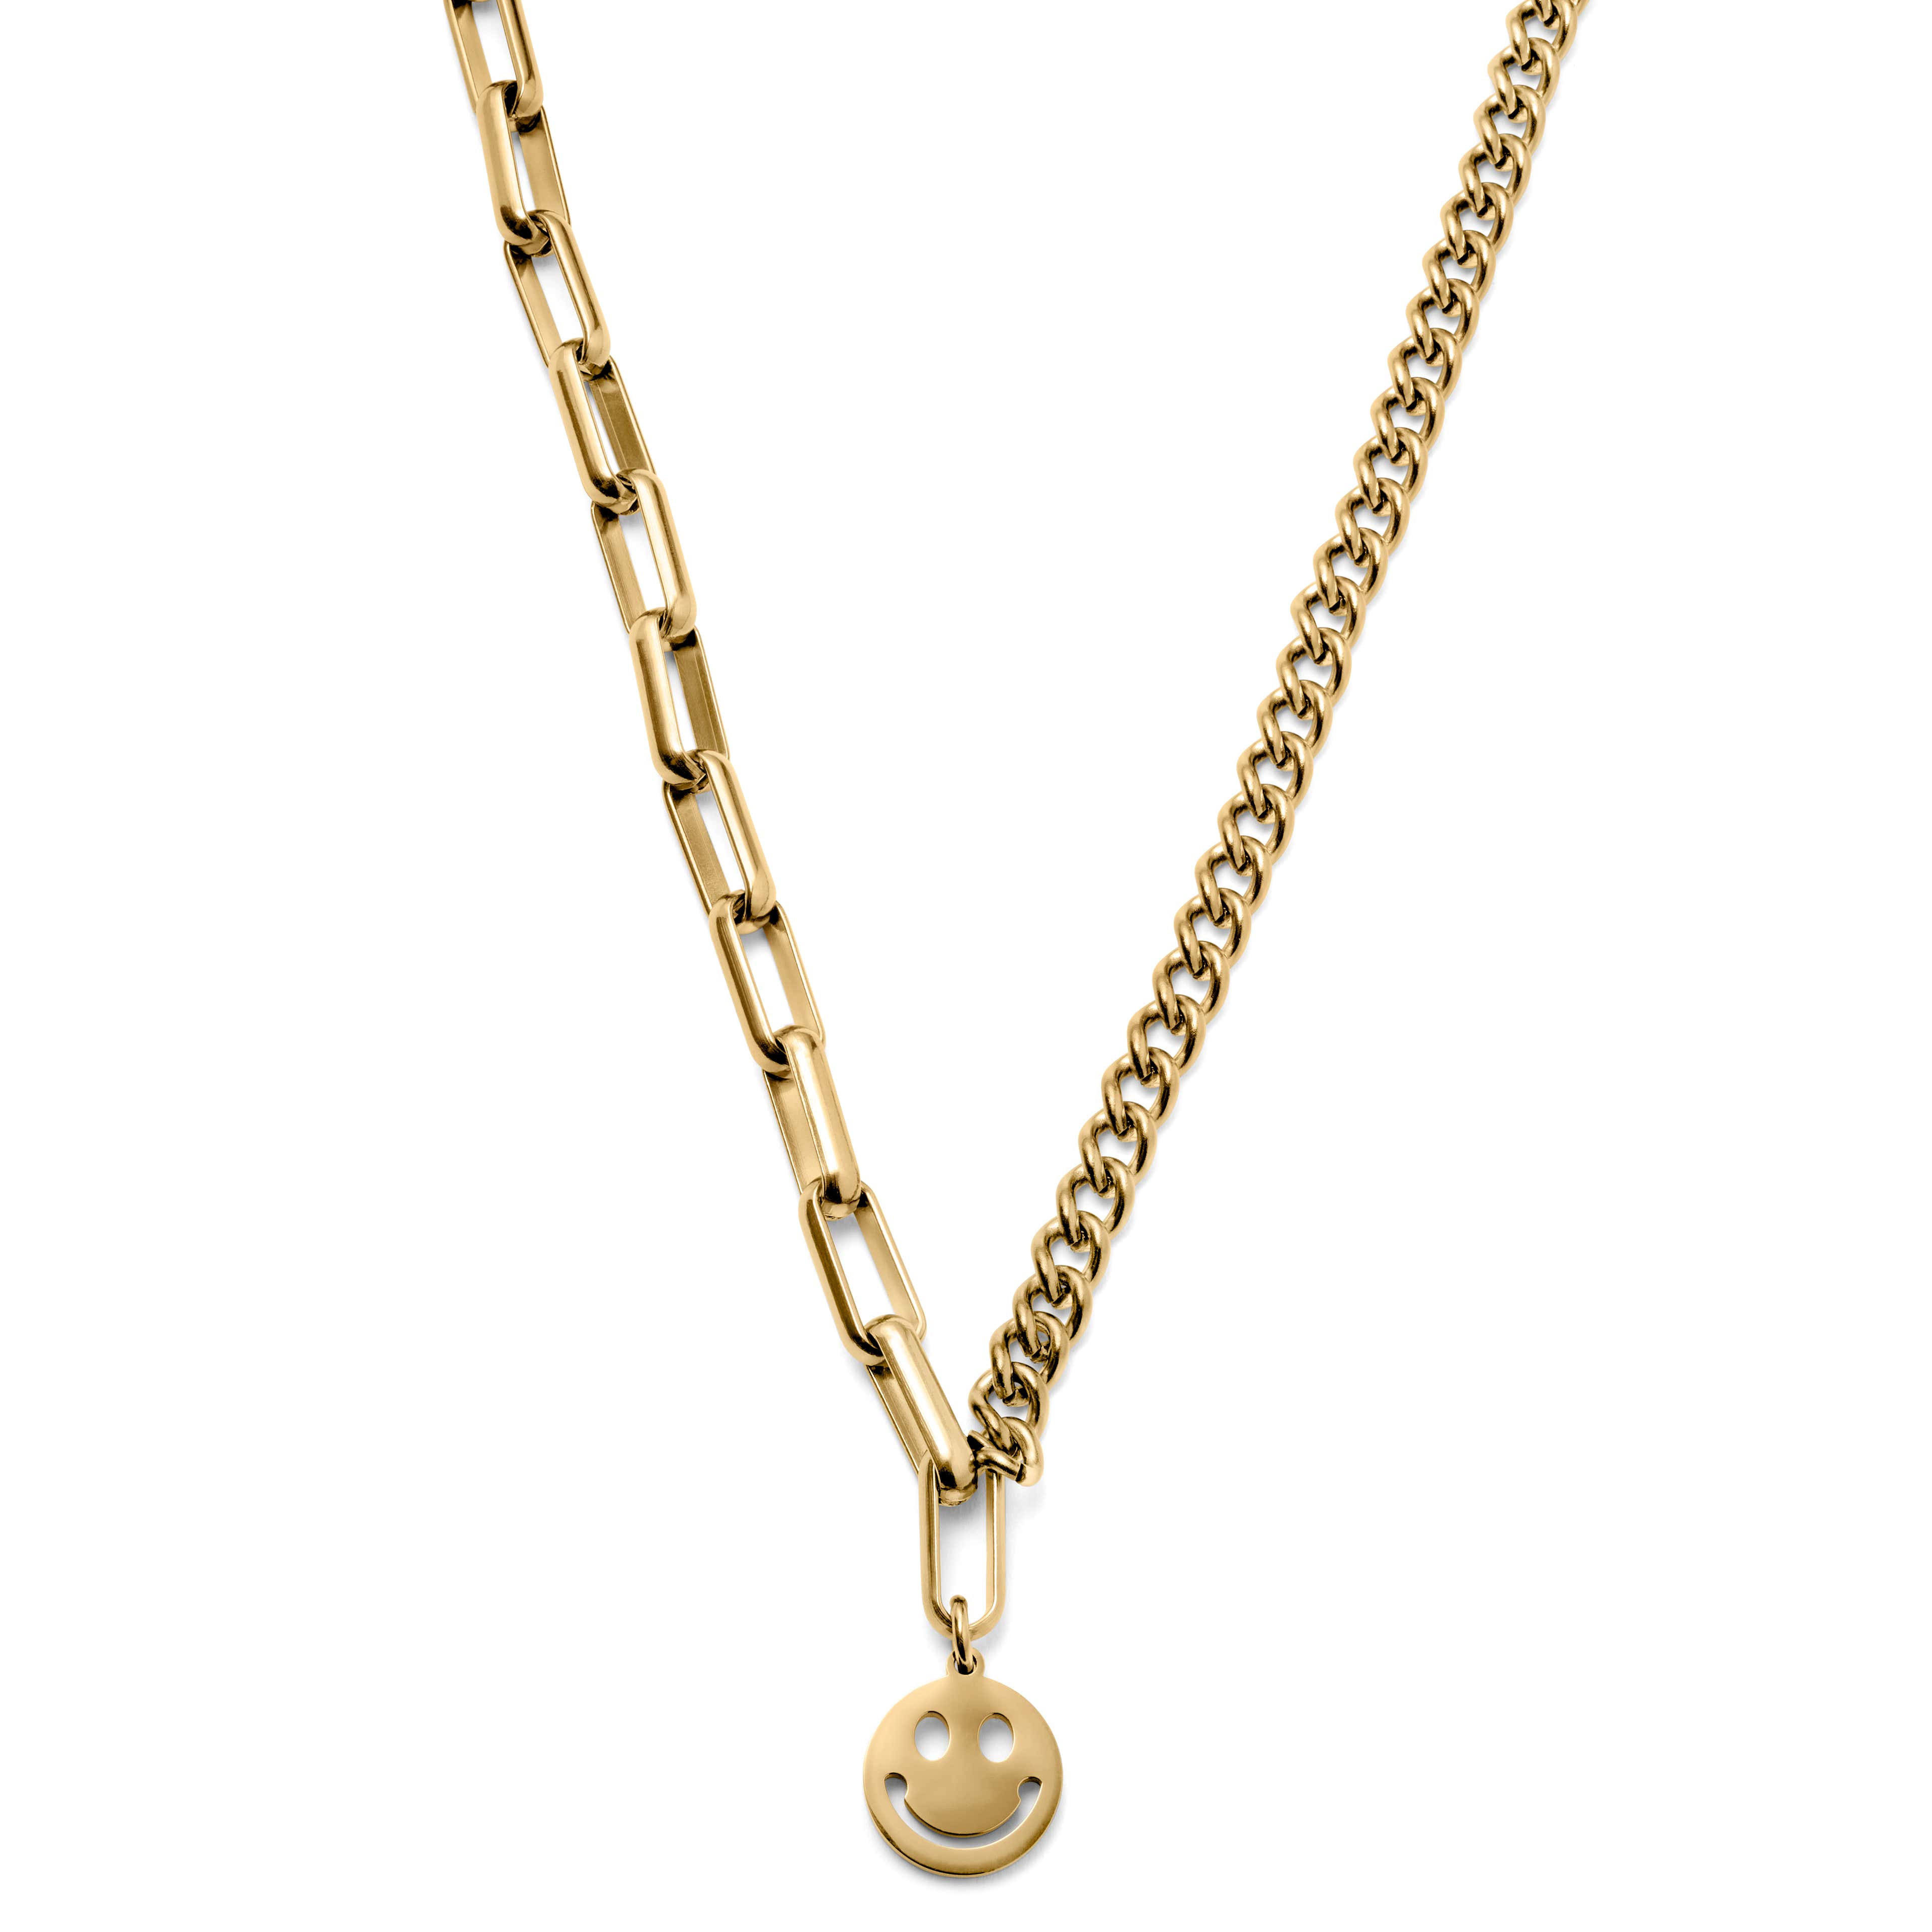 Caleb Amager Gold-Tone Curb & Cable Chain Necklace with Smiley Pendant